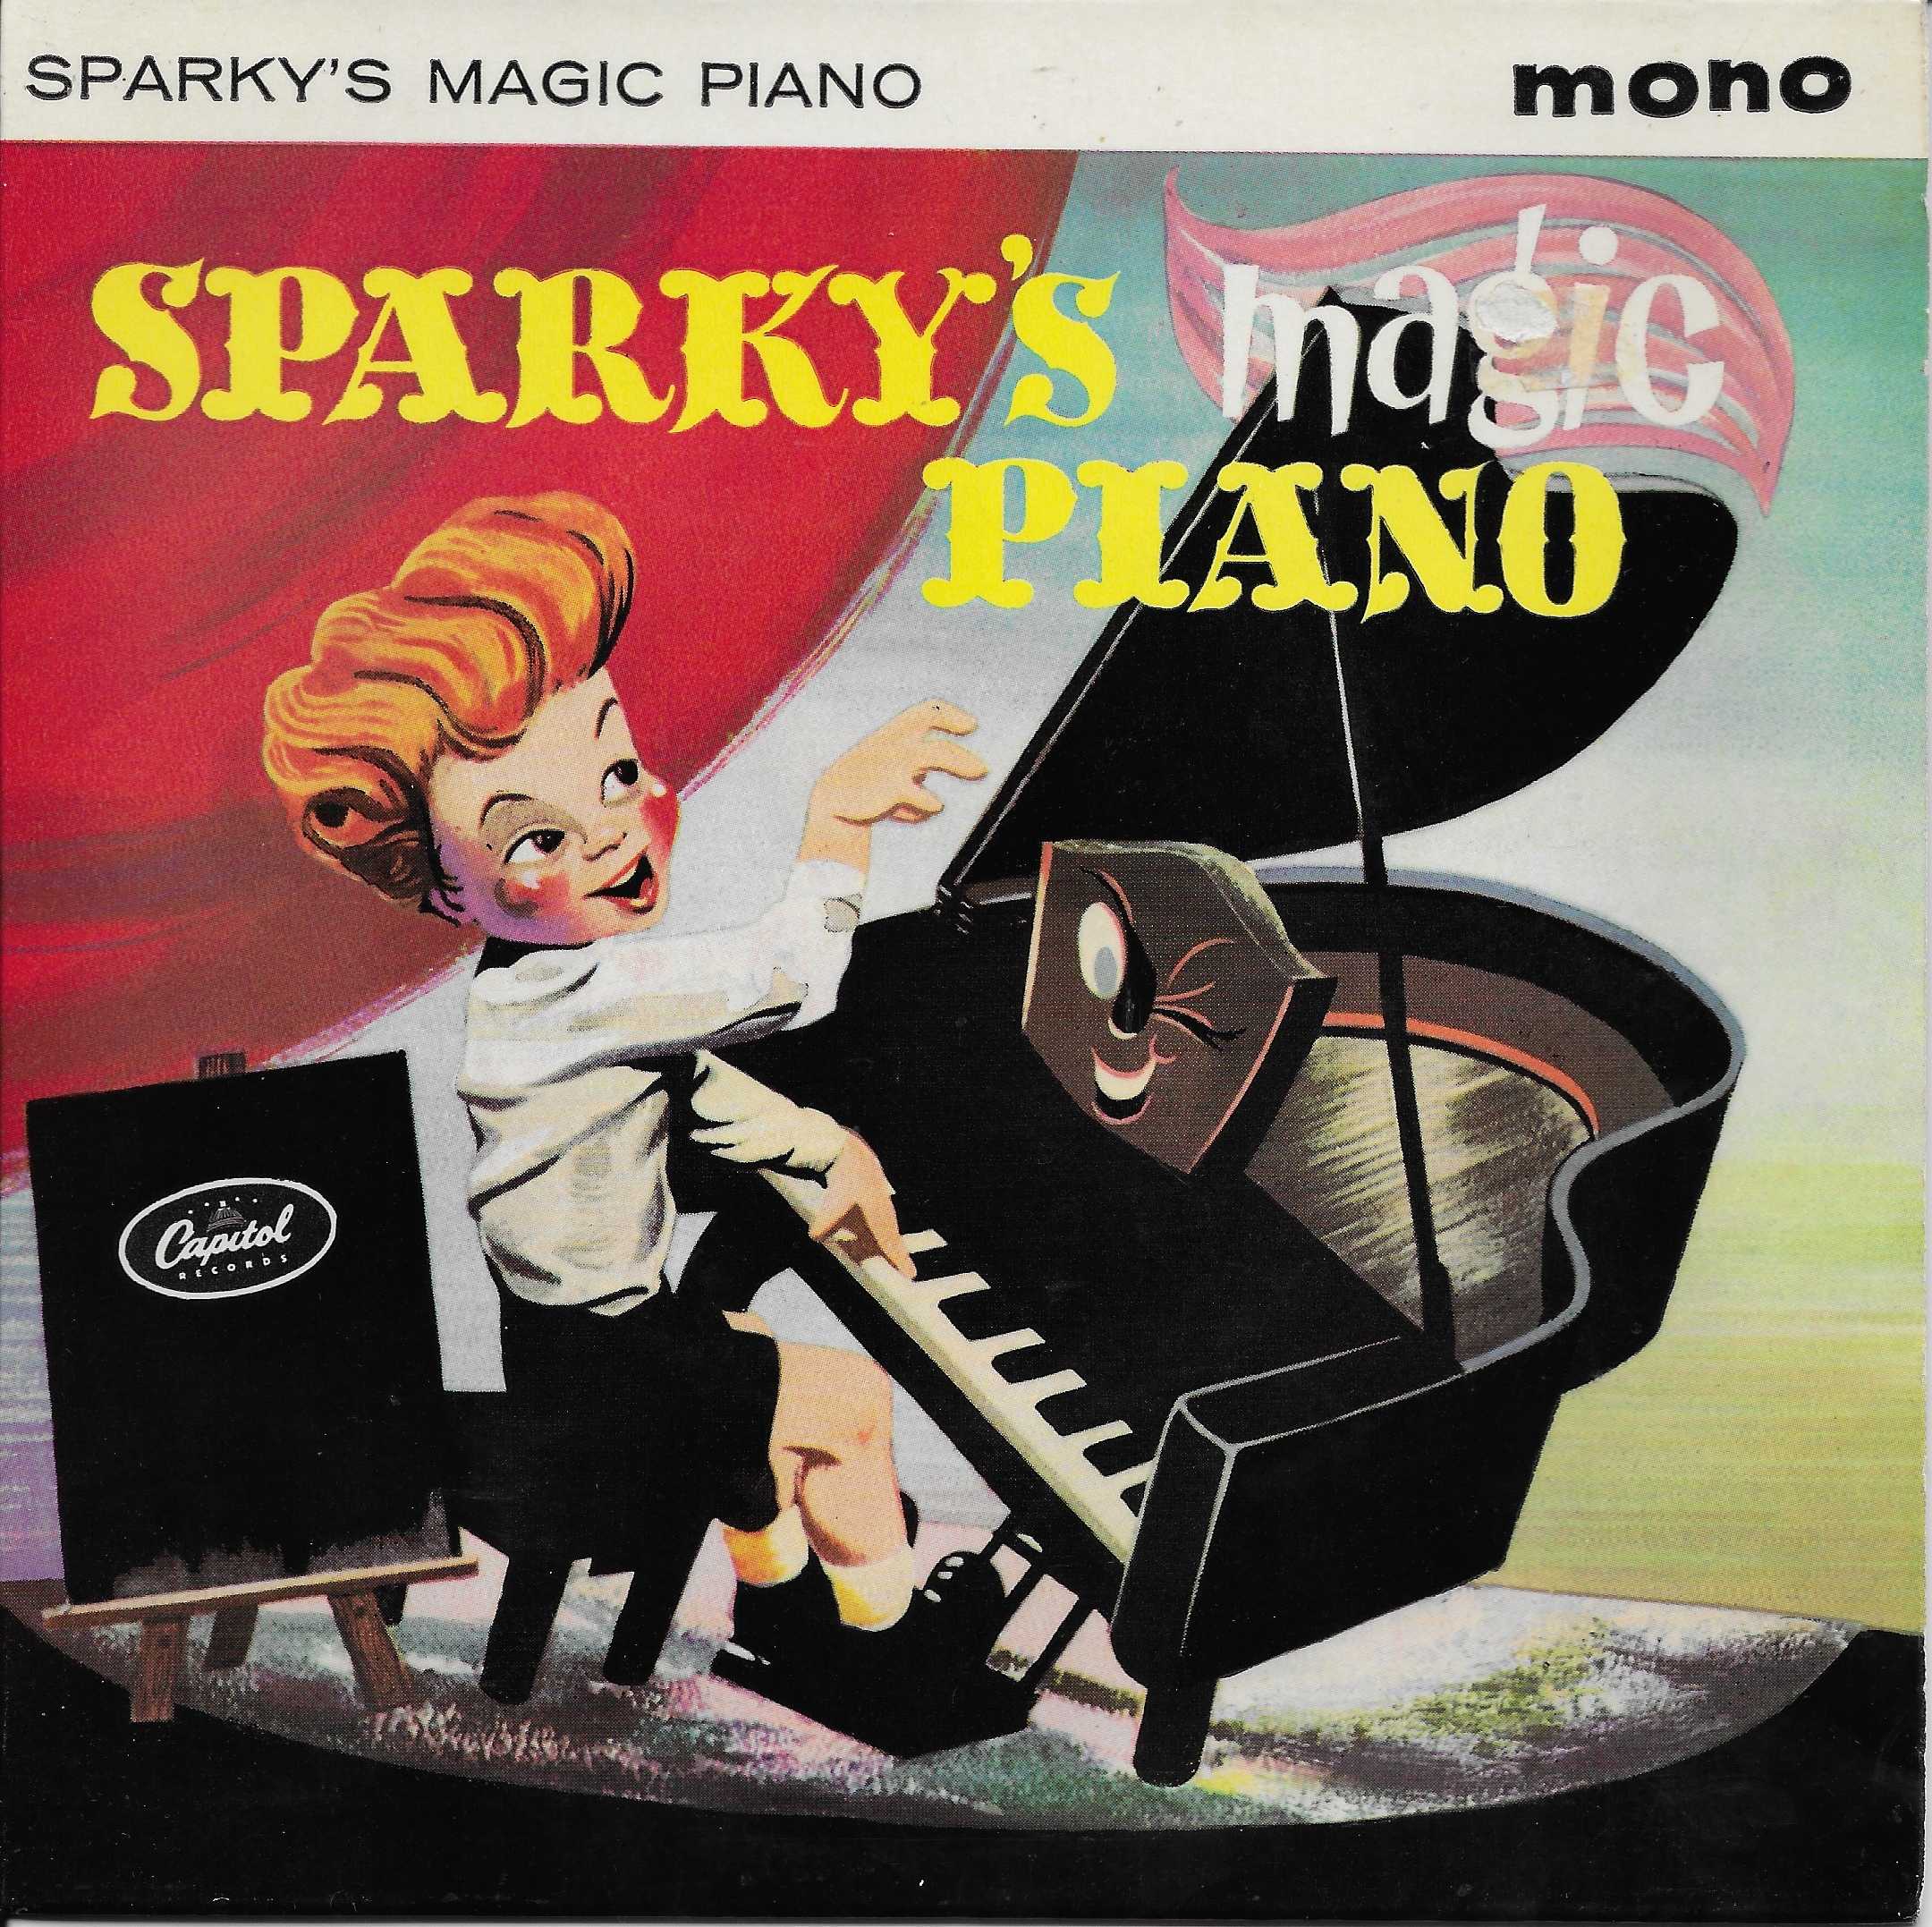 Picture of EAP 1-3003 Sparky's magic piano by artist Billy May / Alan Liningston / Henry Blair / Ray Turner from ITV, Channel 4 and Channel 5 singles library